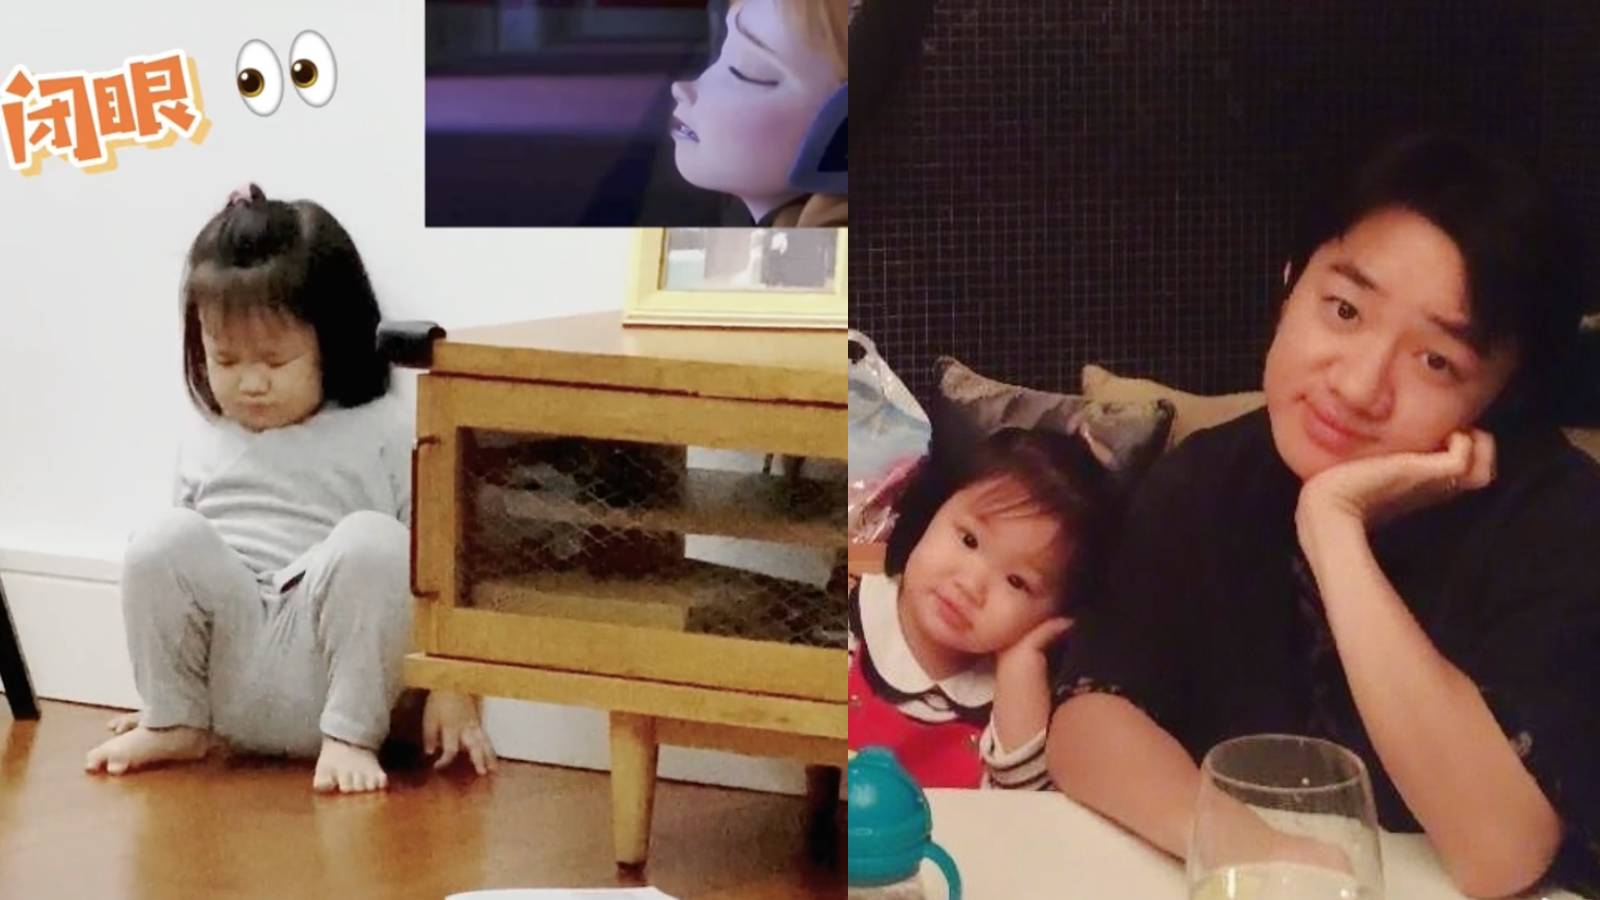 Wong Cho Lam’s 2-Year-Old Daughter’s Very Drama Reenactment Of Disney’s ‘Frozen’ Is So Adorable